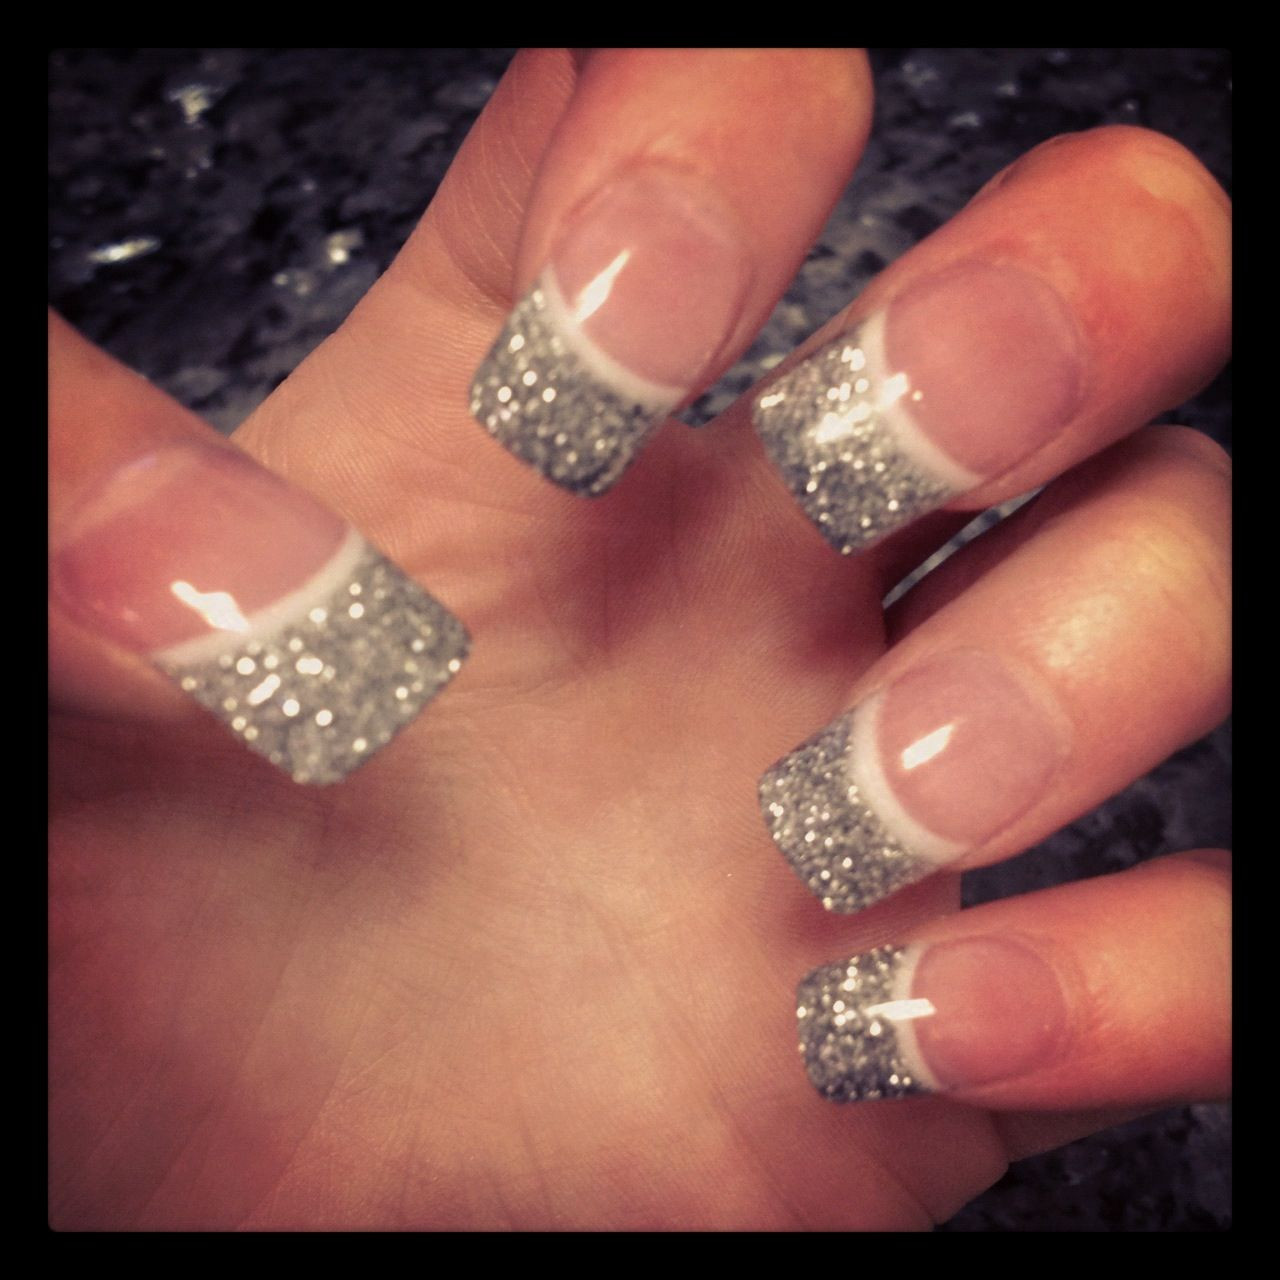 Silver Glitter Tips Nails
 Best 25 Silver tip nails ideas on Pinterest